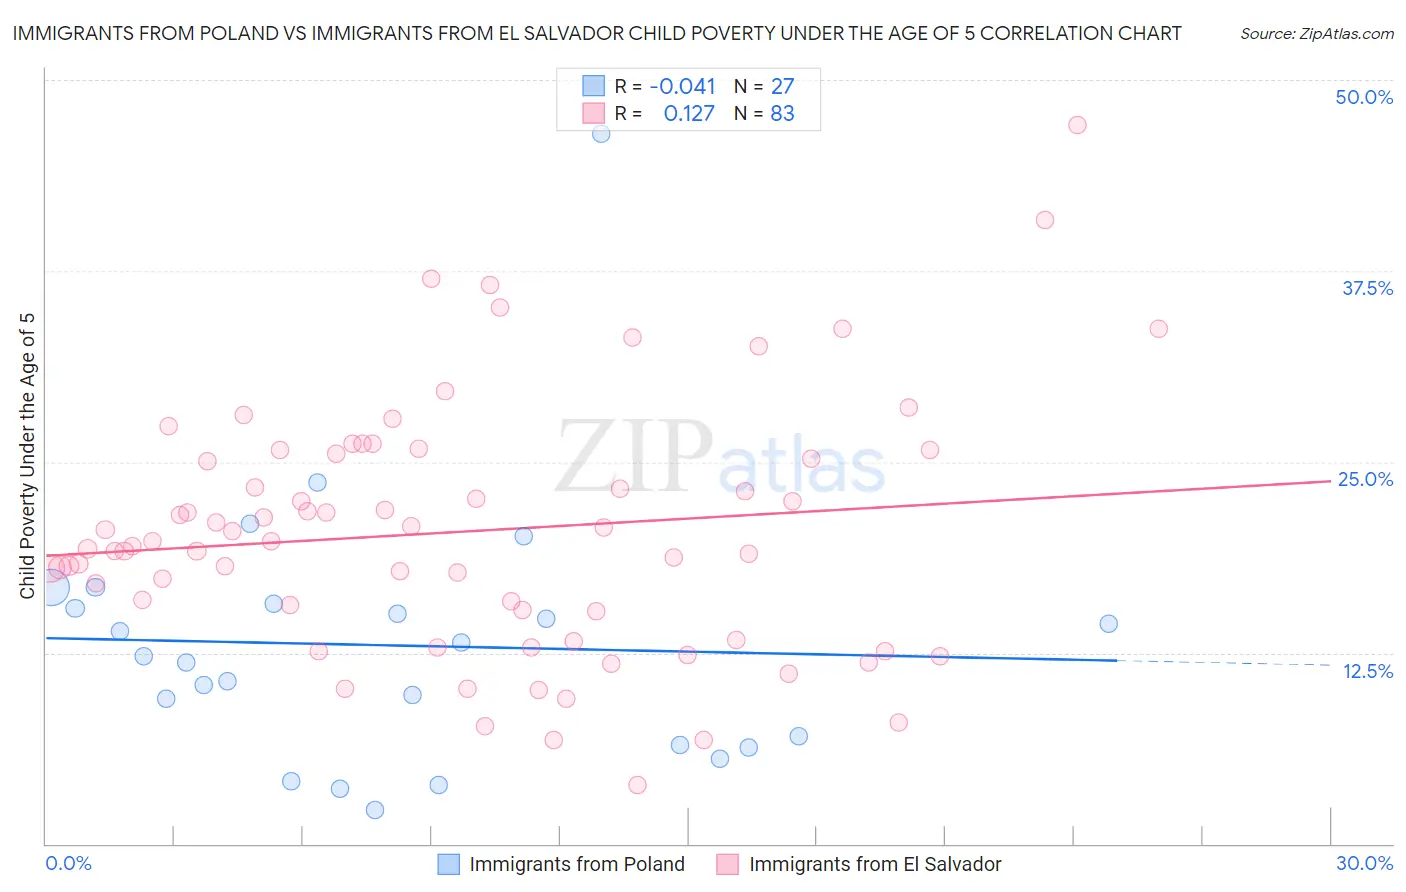 Immigrants from Poland vs Immigrants from El Salvador Child Poverty Under the Age of 5